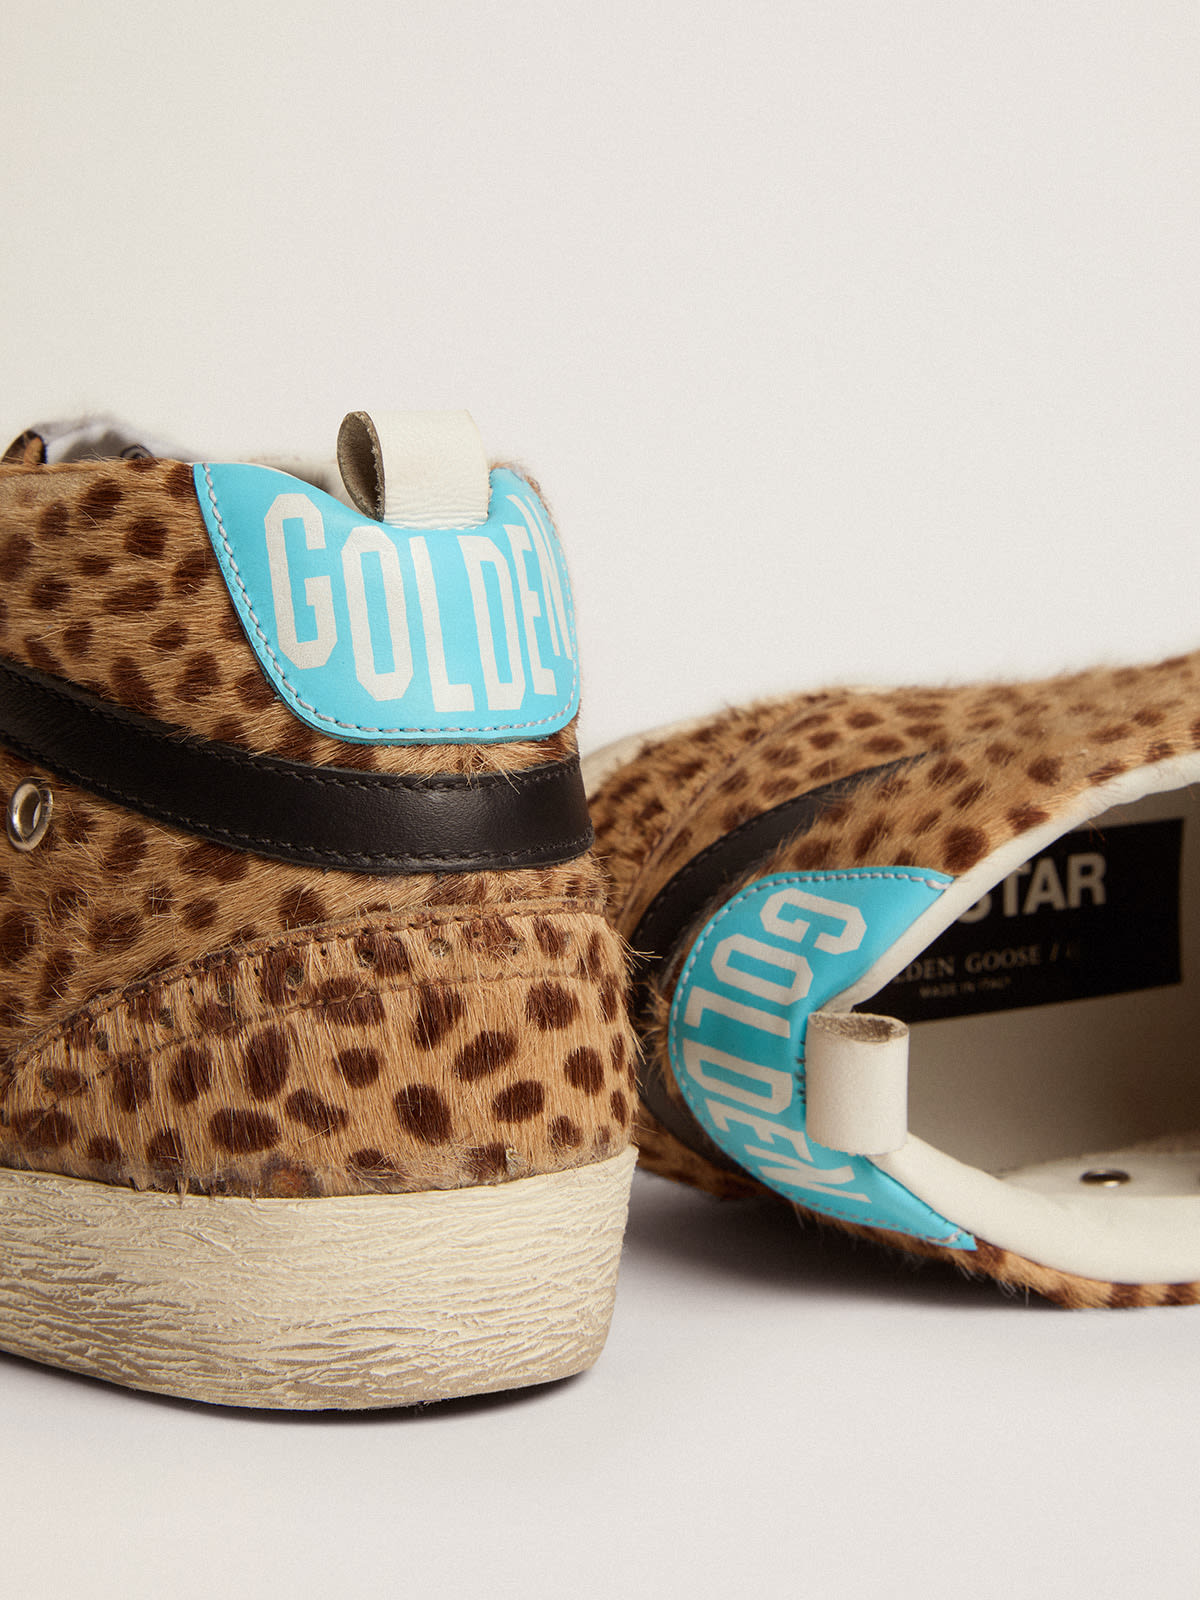 Golden Goose - Mid Star sneakers in animal-print pony skin with silver glitter star in 